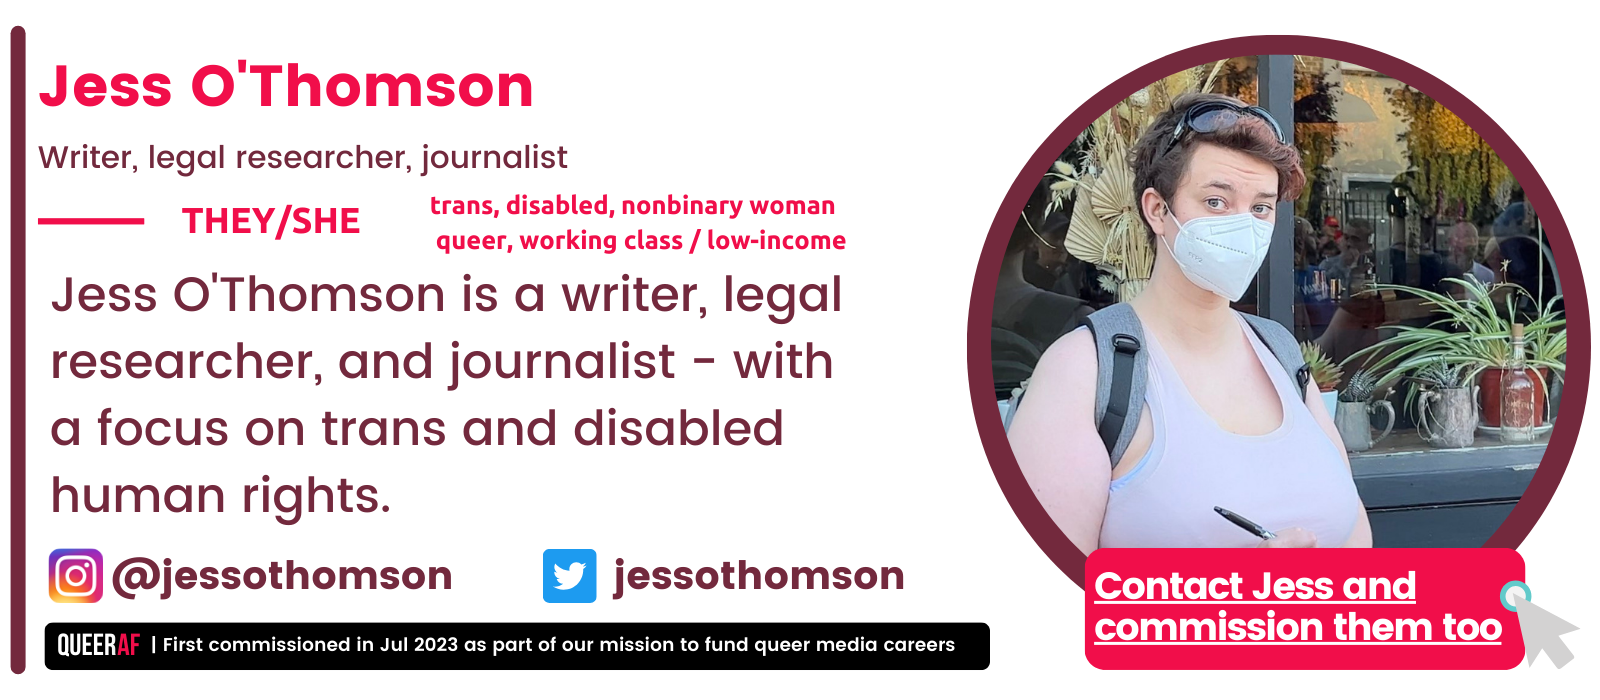   A writer, legal researcher, and journalist - with a focus on trans and disabled human rights. Jess is a Director of Trans Safety Network, where they research and publish on anti-trans harm, including the far right.   trans, disabled, nonbinary woman   queer, working class / low-income  They/She Jess O'Thomson Writer, legal researcher, journalist